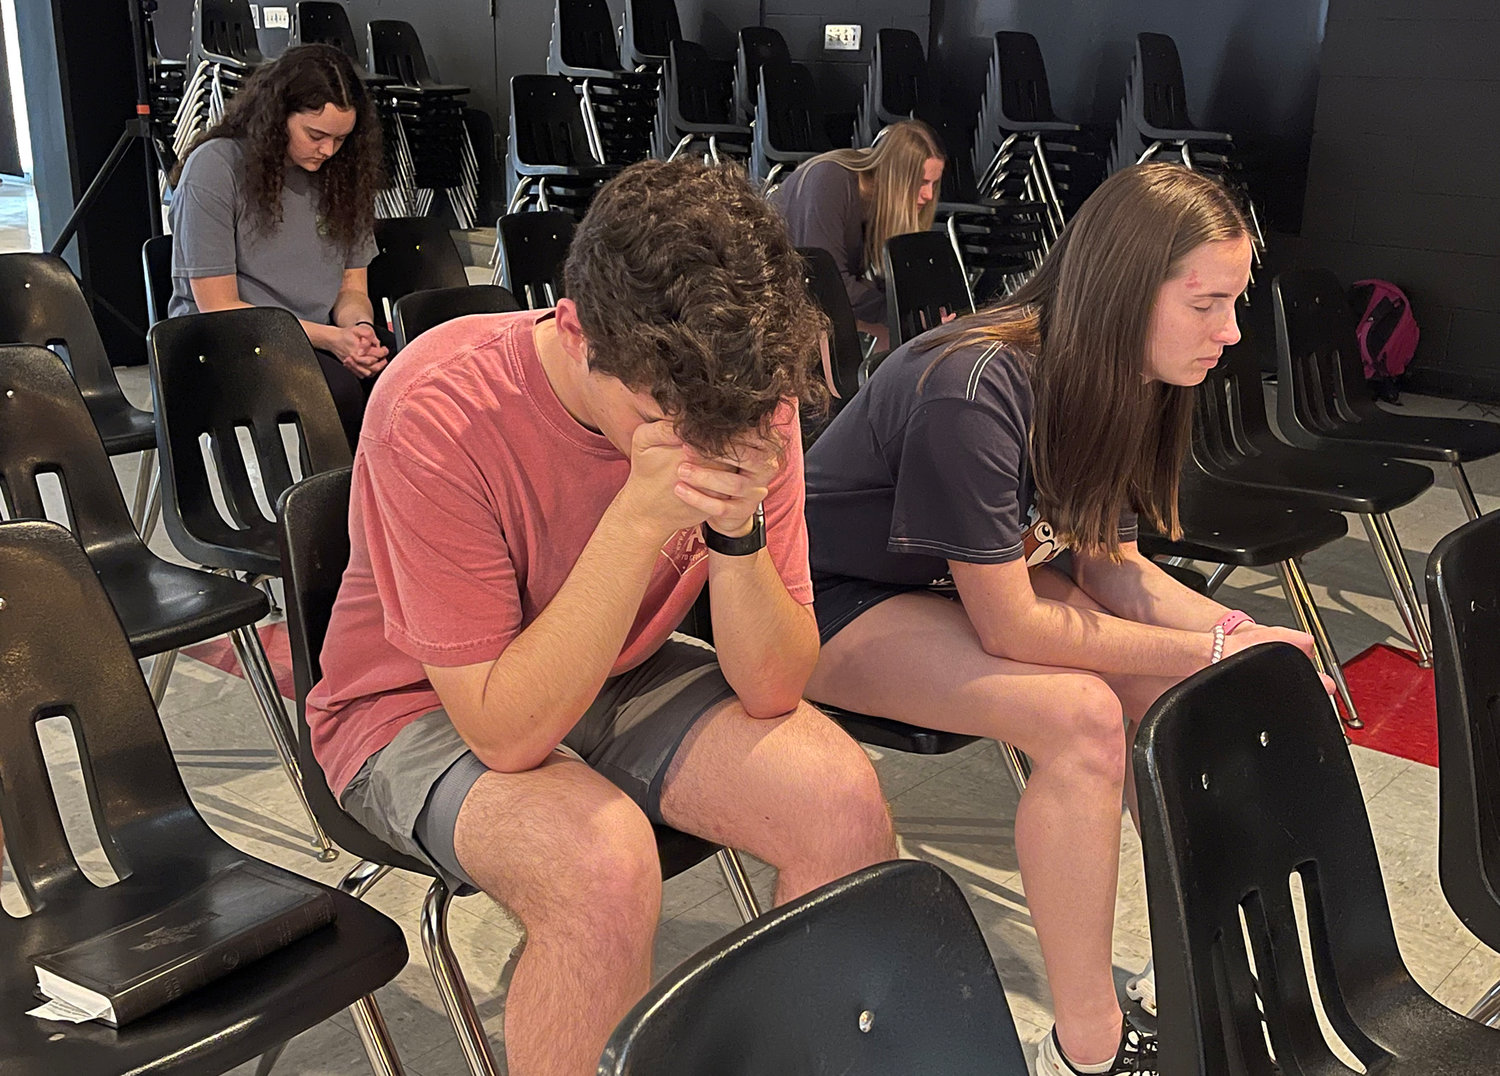 Students pray during the Collegiate Day of Prayer at the University of Georgia, Thursday, Feb. 23, 2023.